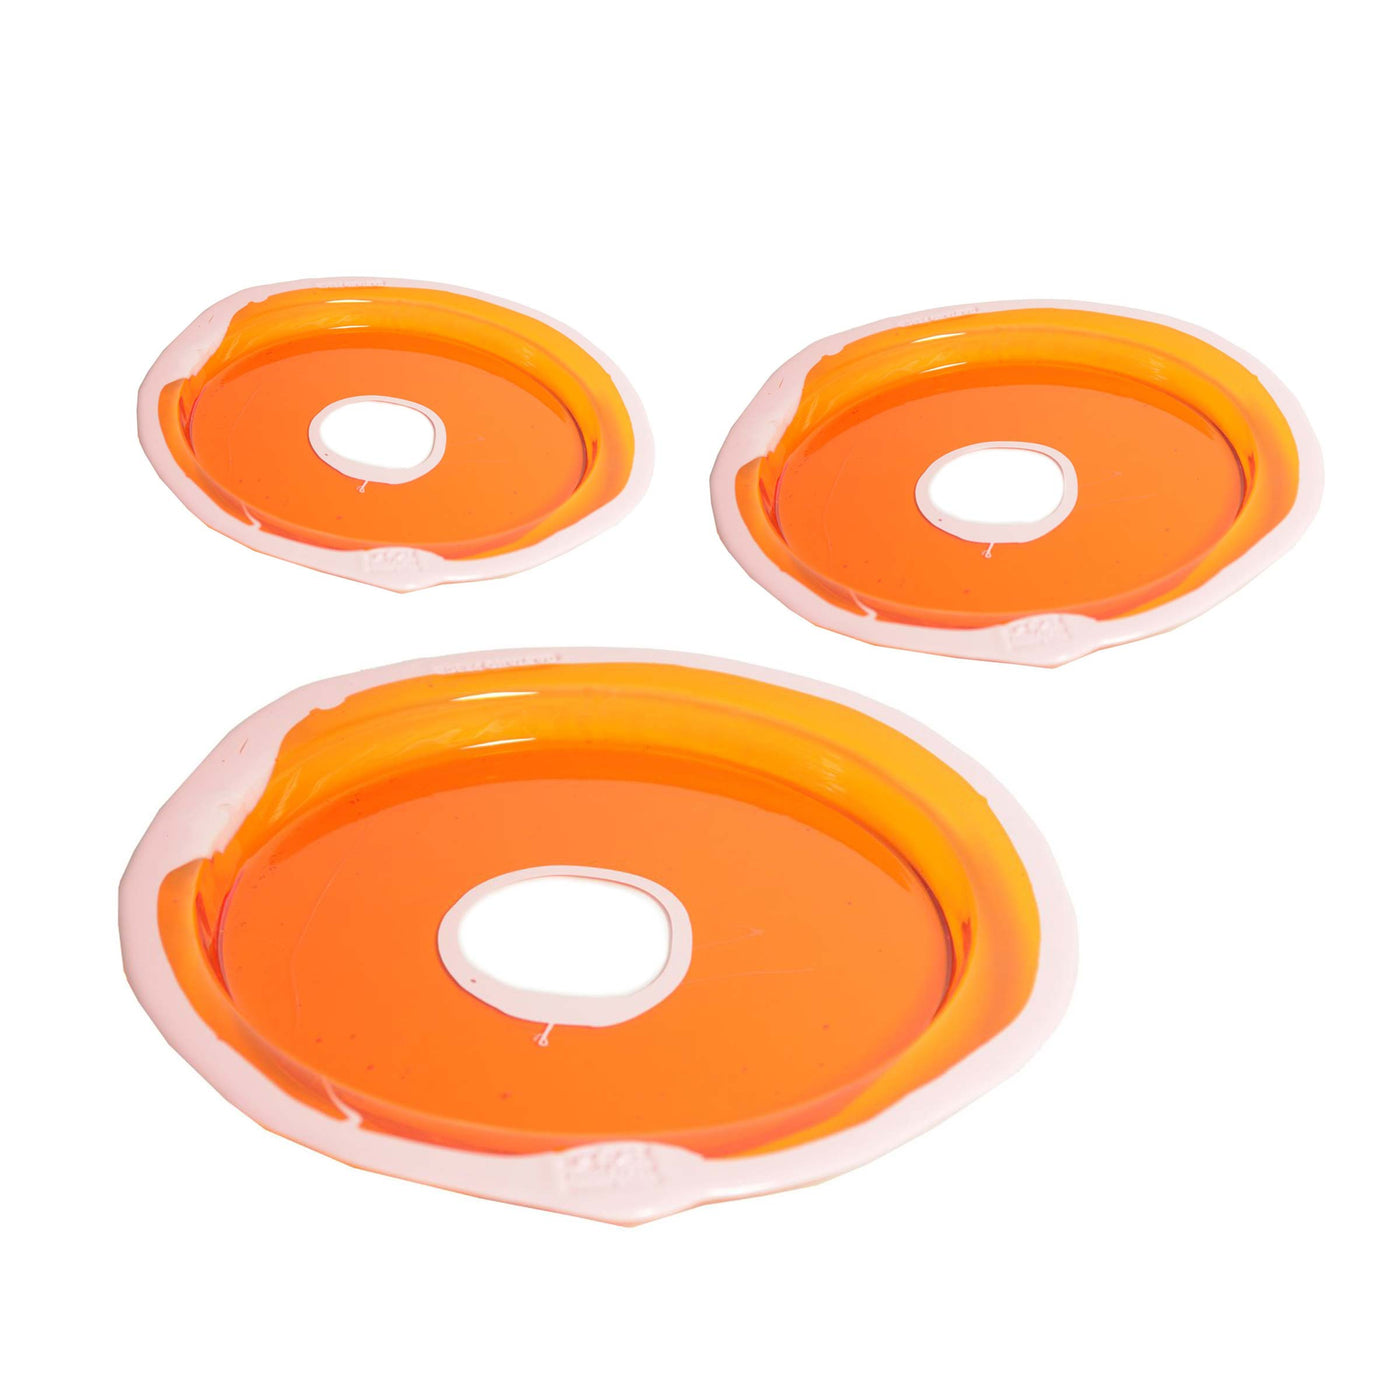 Resin Round Tray TRY-TRAY Orange by Gaetano Pesce for Fish Design 01